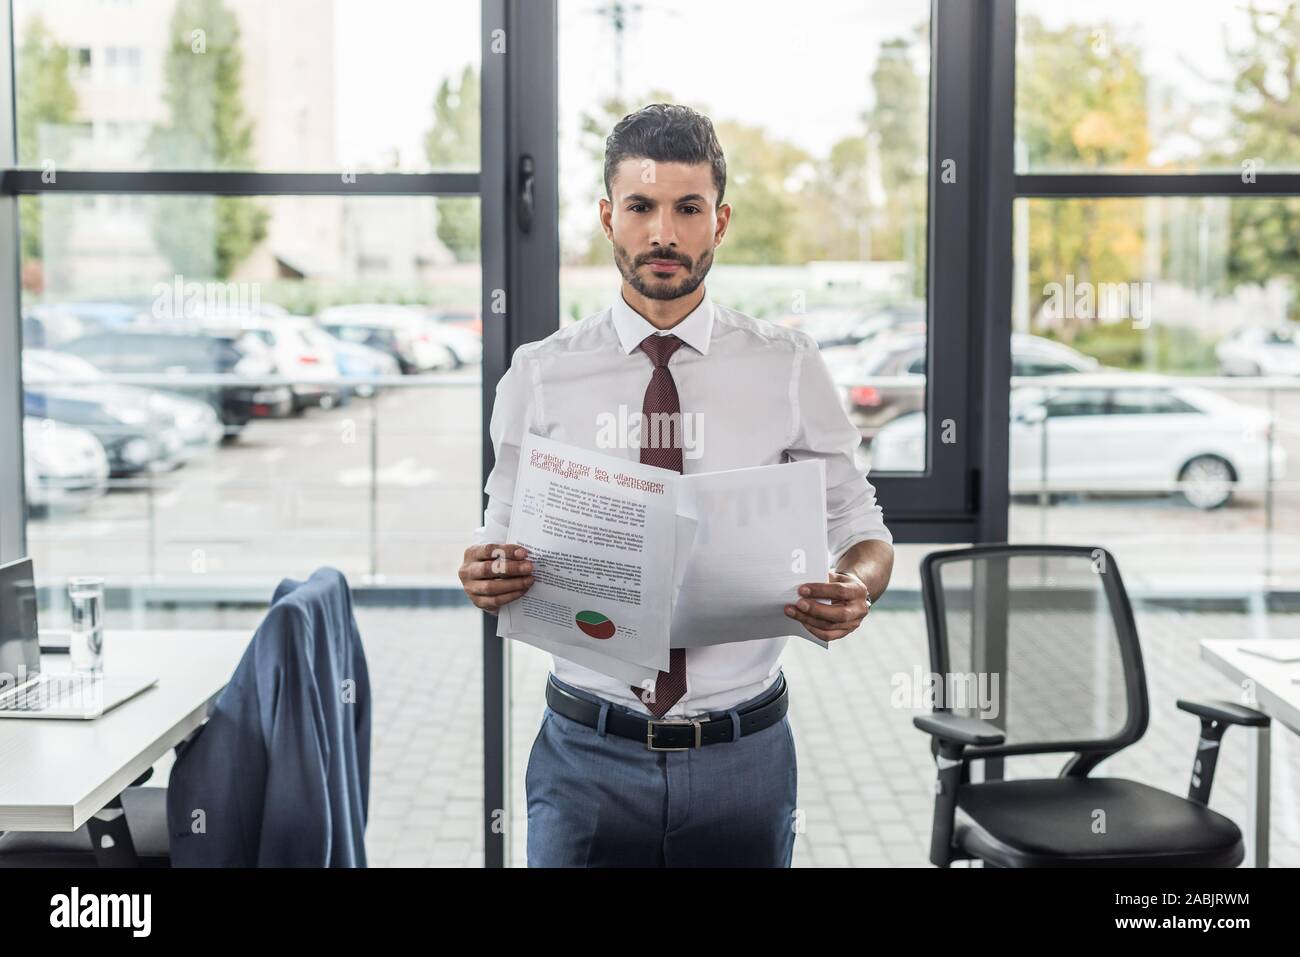 discouraged businessman looking at camera while holding documents Stock Photo